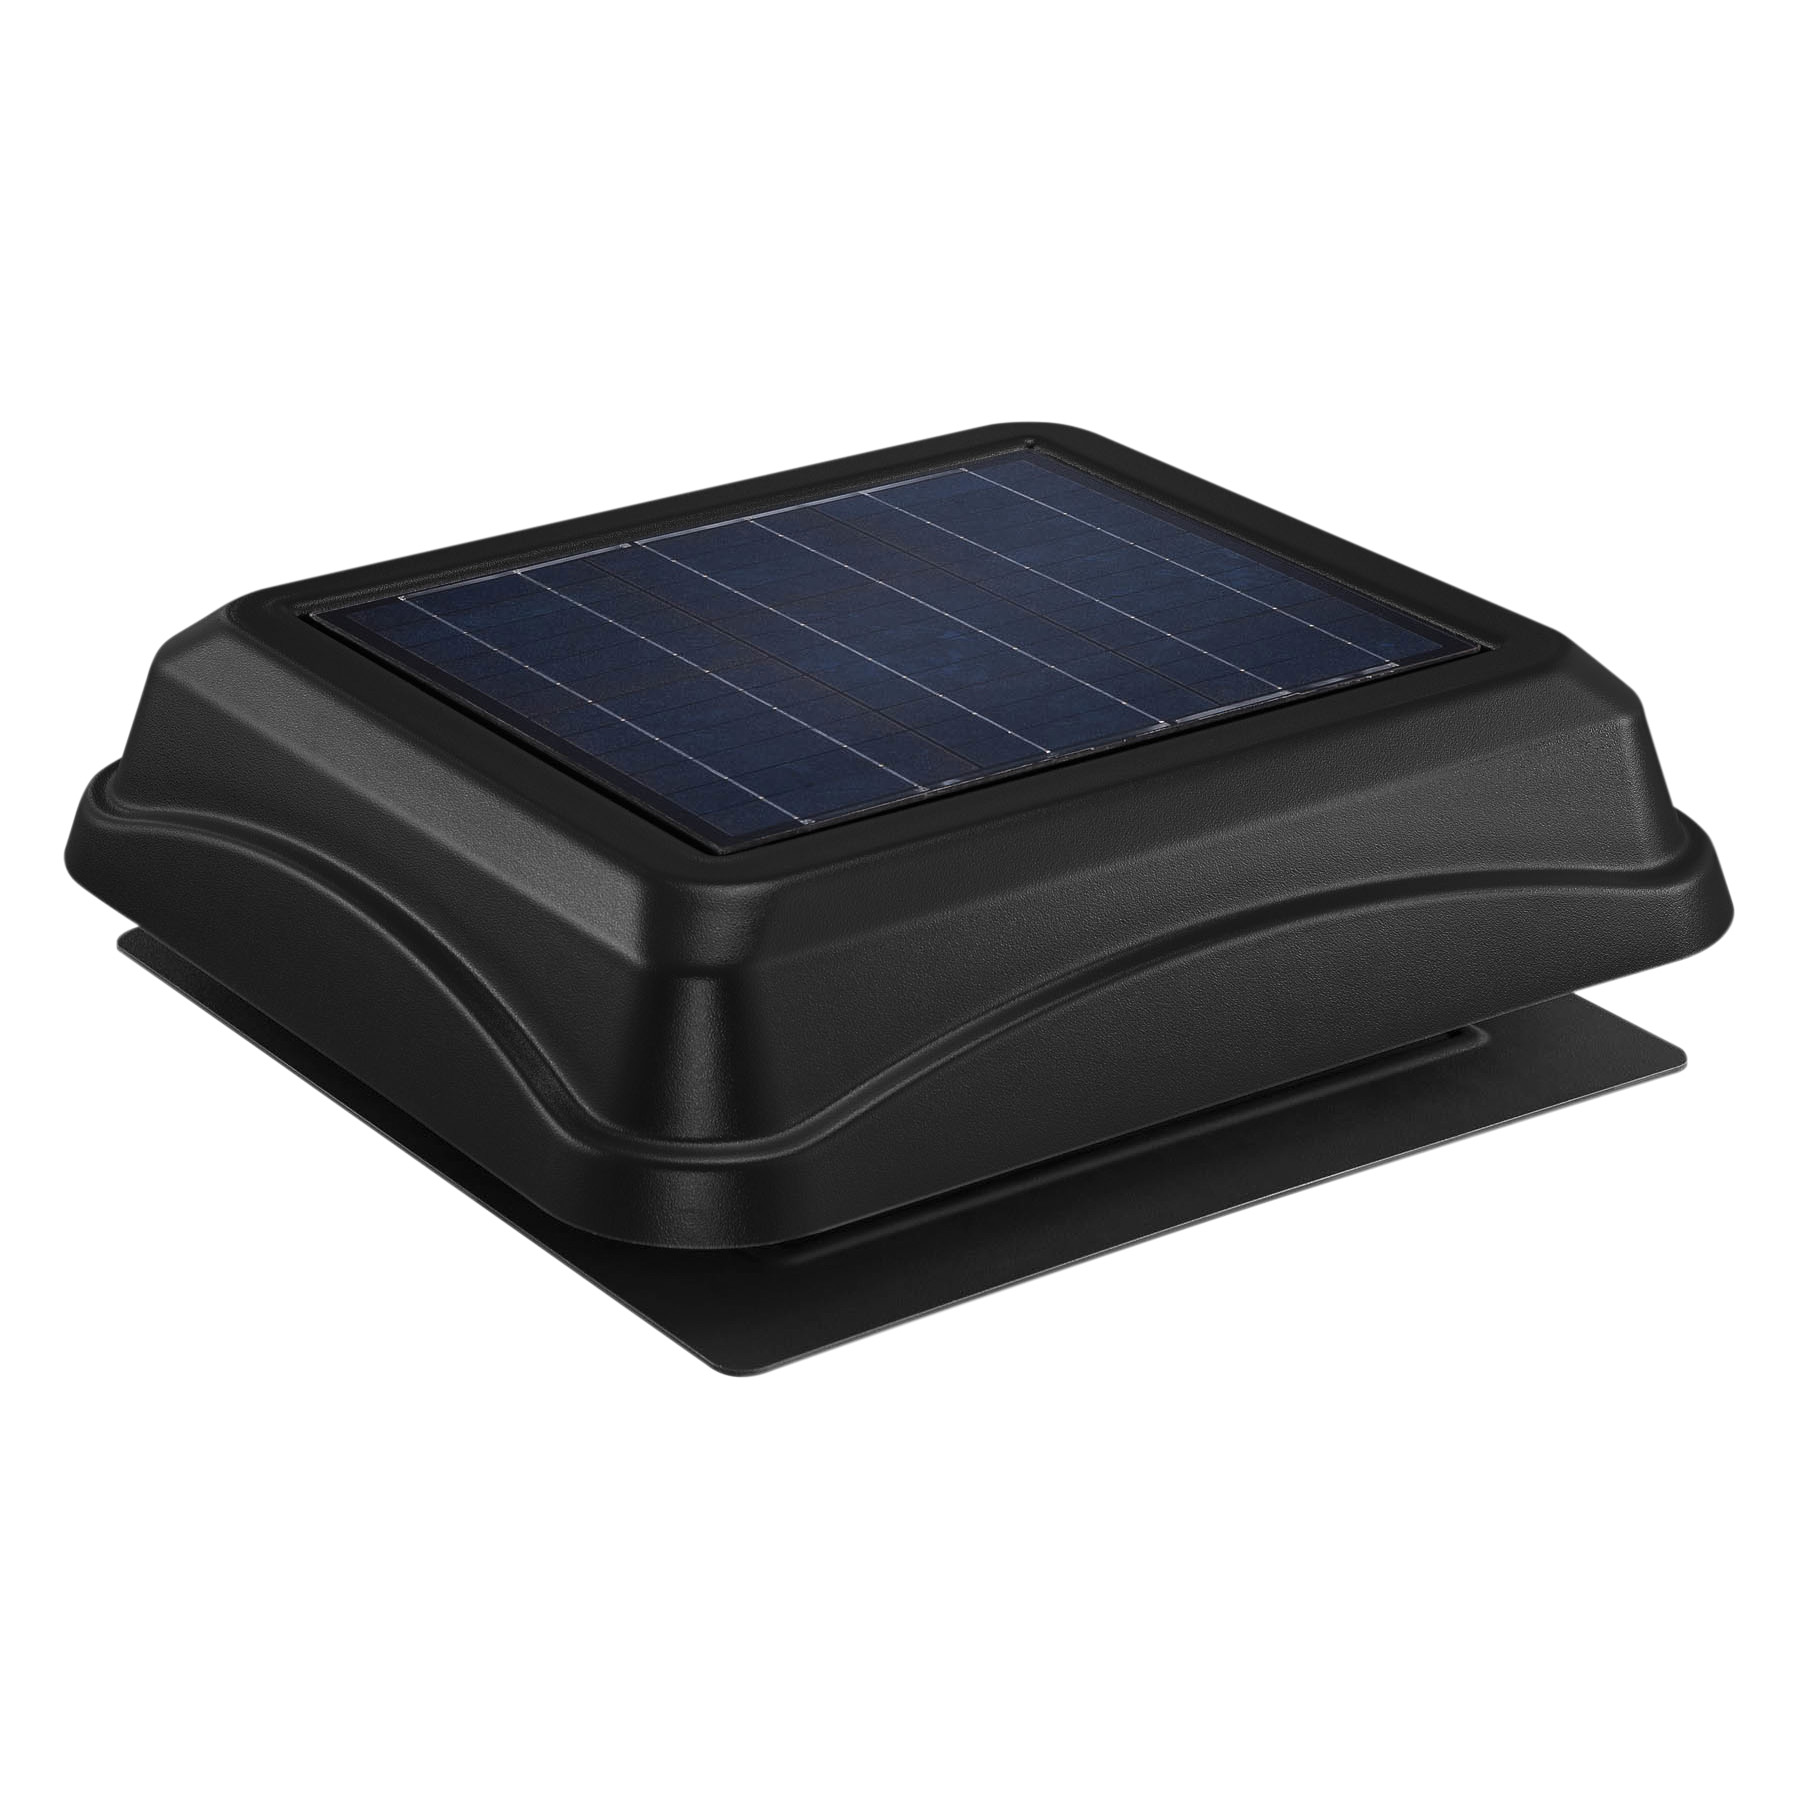 **DISCONTINUED** Broan® 537 CFM Solar Powered Attic and Garage Ventilation Fan, Surface Mount, Black